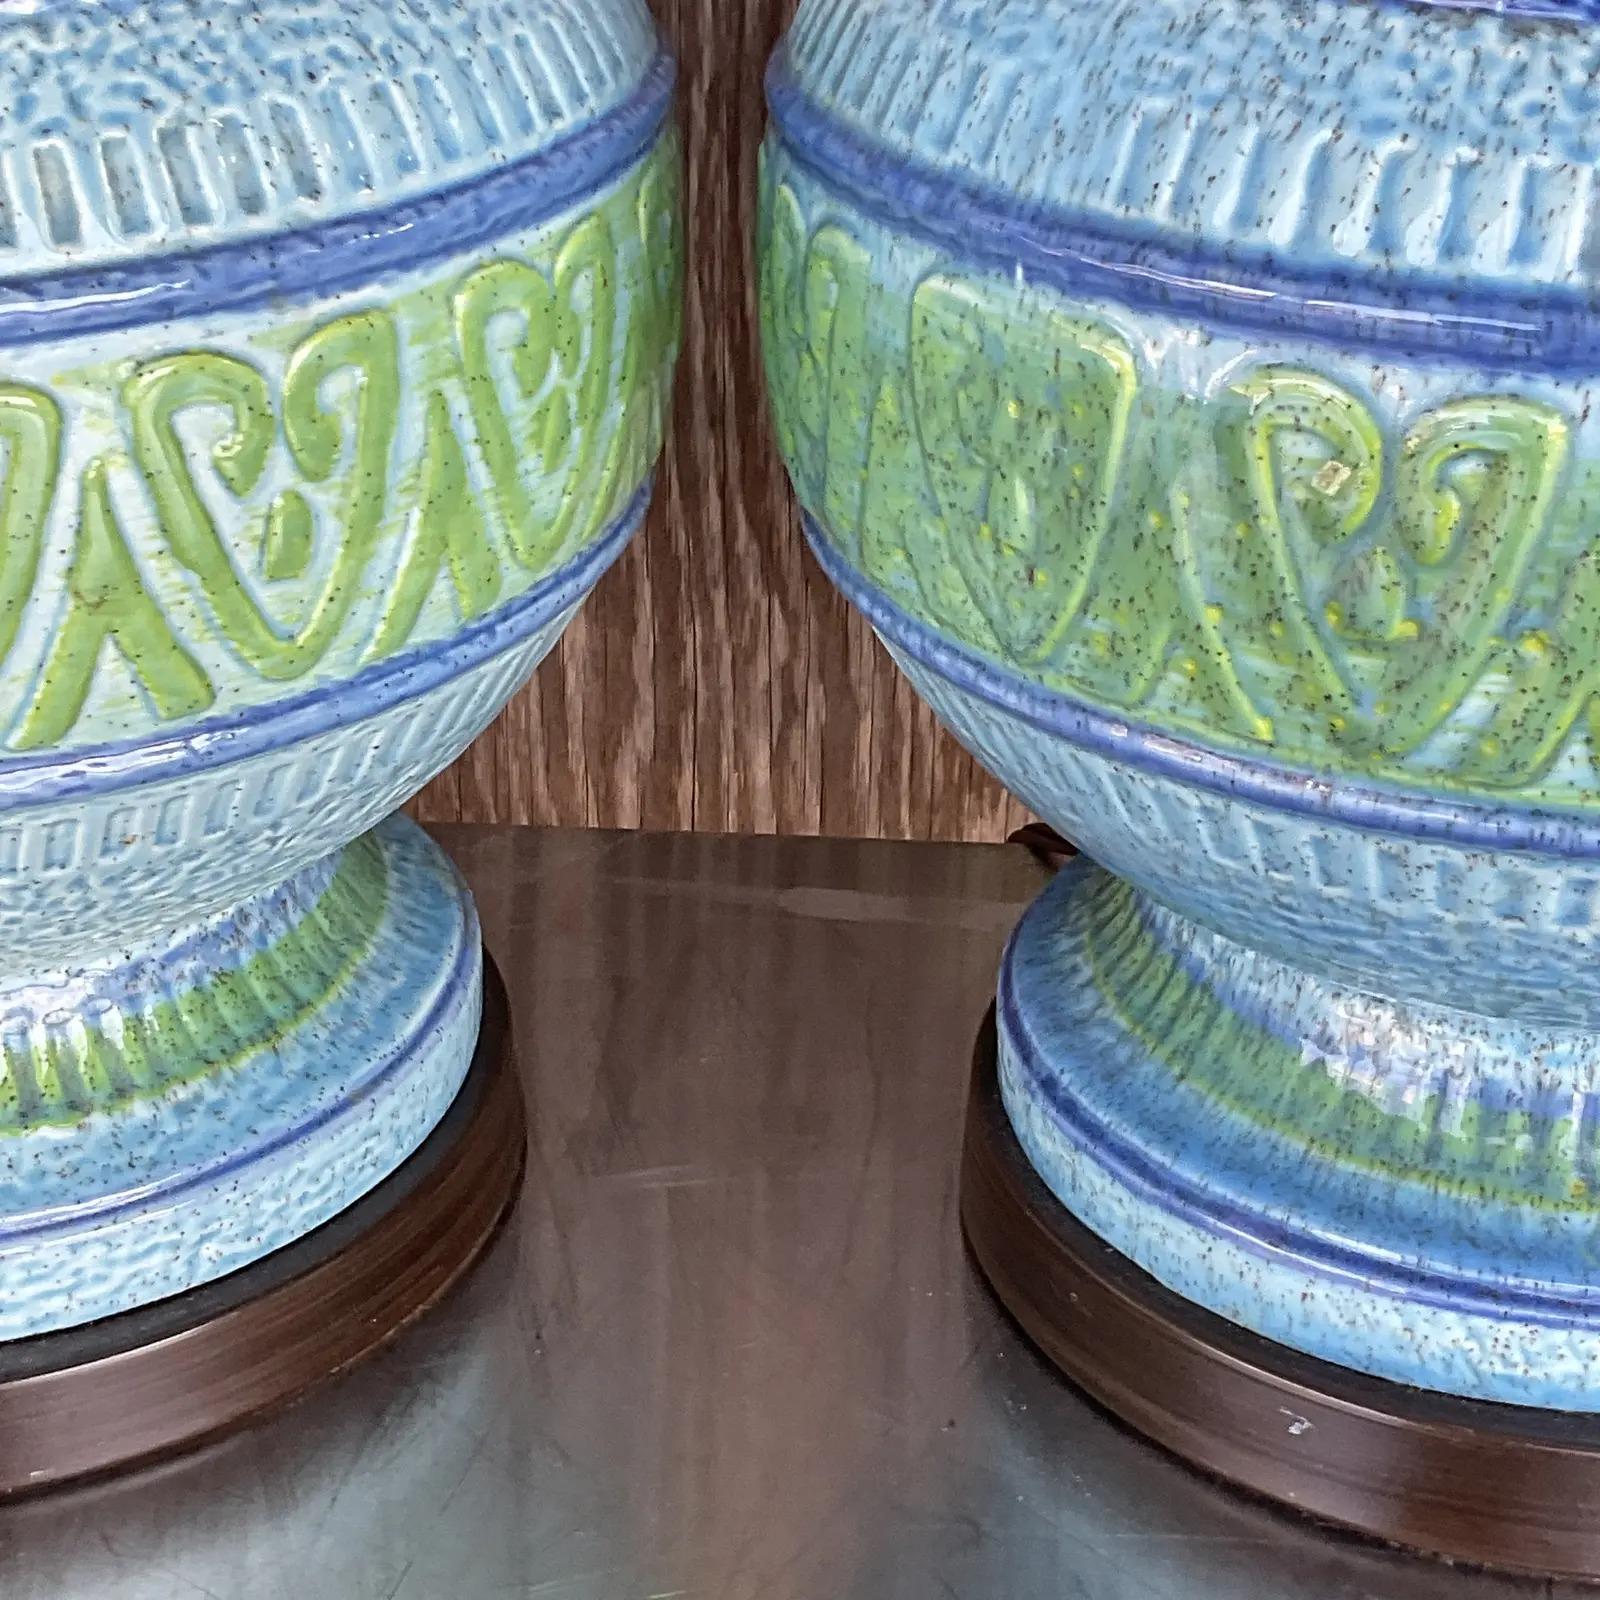 Outstanding pair of Midcentury table lamps. A brilliant blue green design with relief details. Acquired from a Palm Beach estate.

The lamps are in great vintage condition. Minor scuffs and blemishes appropriate to their age and use.

The vendor